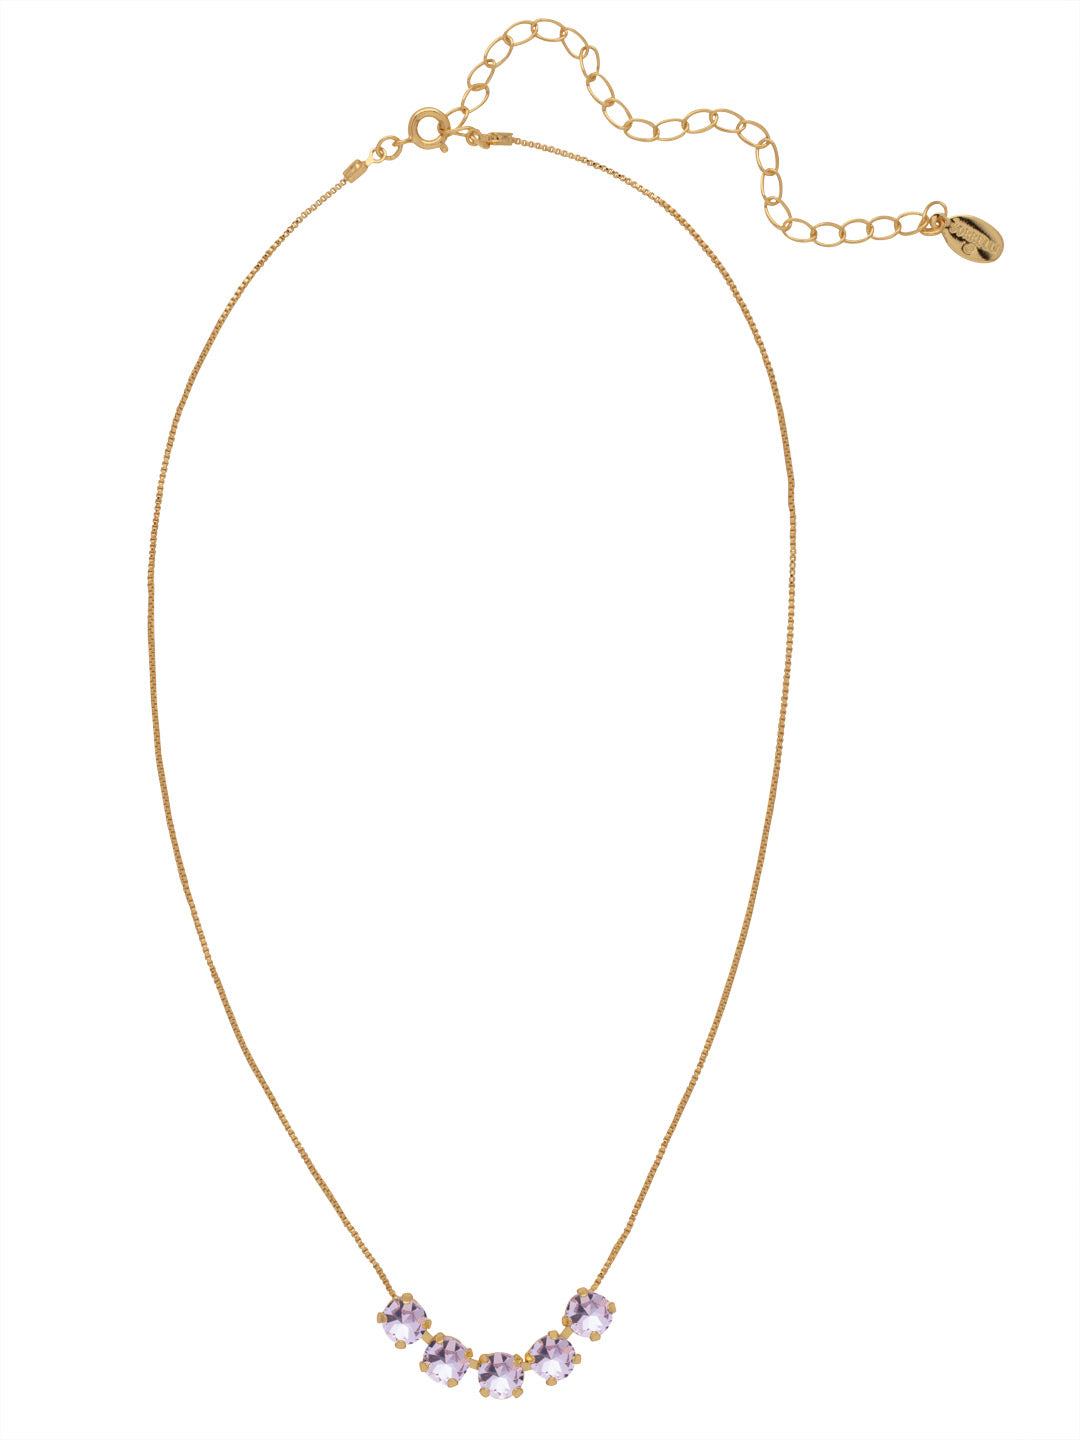 Shaughna Tennis Necklace - NFC84BGVI - <p>The Shaughna Tennis Necklace features five crystals on a delicate adjustable chain. From Sorrelli's Violet collection in our Bright Gold-tone finish.</p>